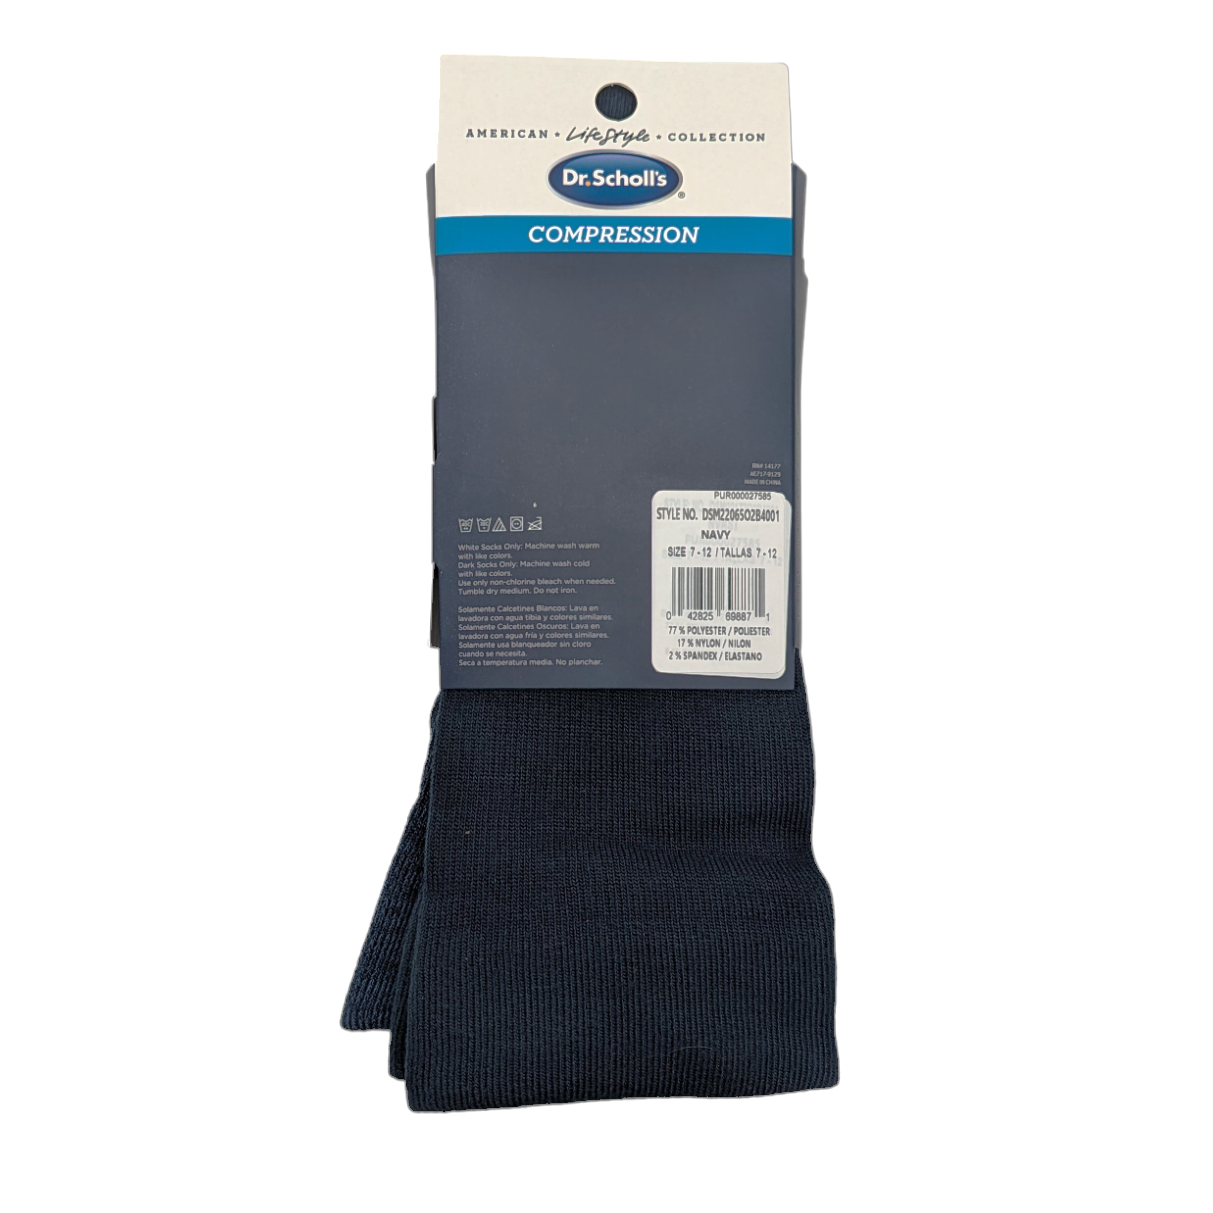 Dr. Scholl's Men's Over the Calf Compression Socks, 2 Pair Navy Blue